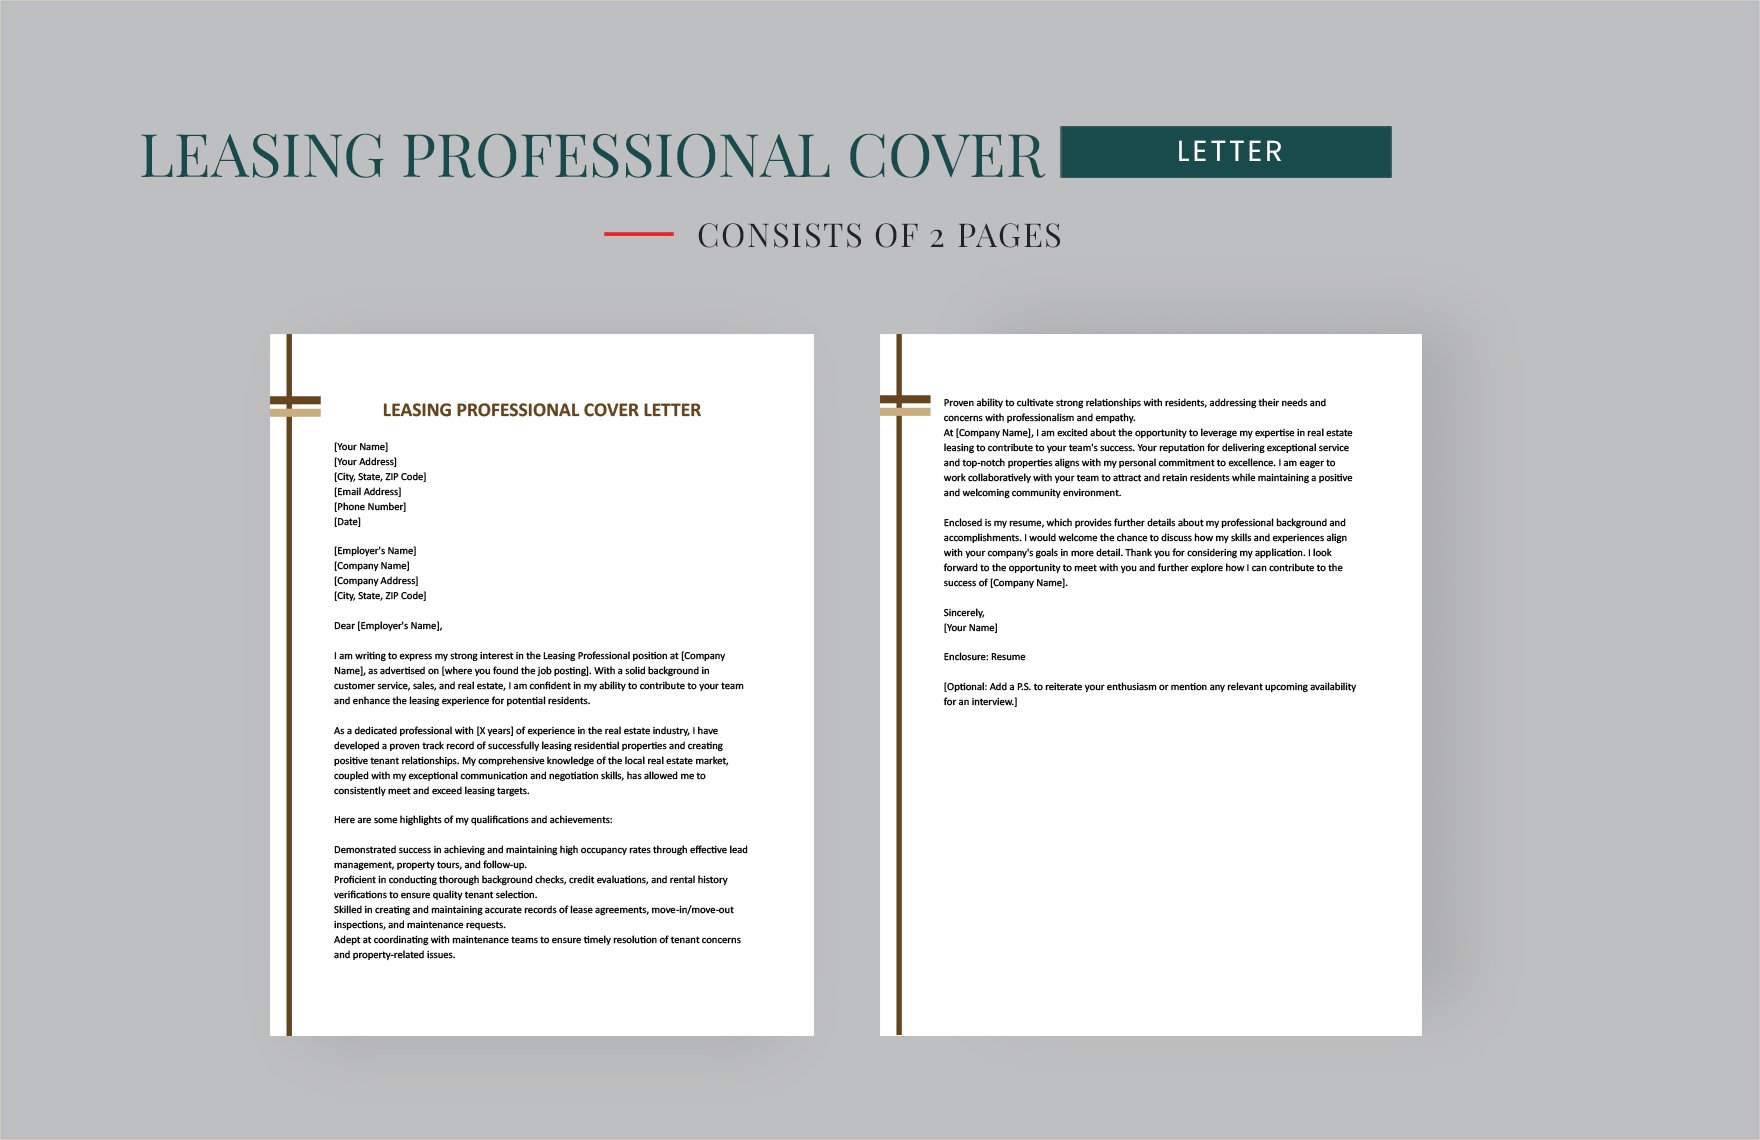 Leasing Professional Cover Letter in Word